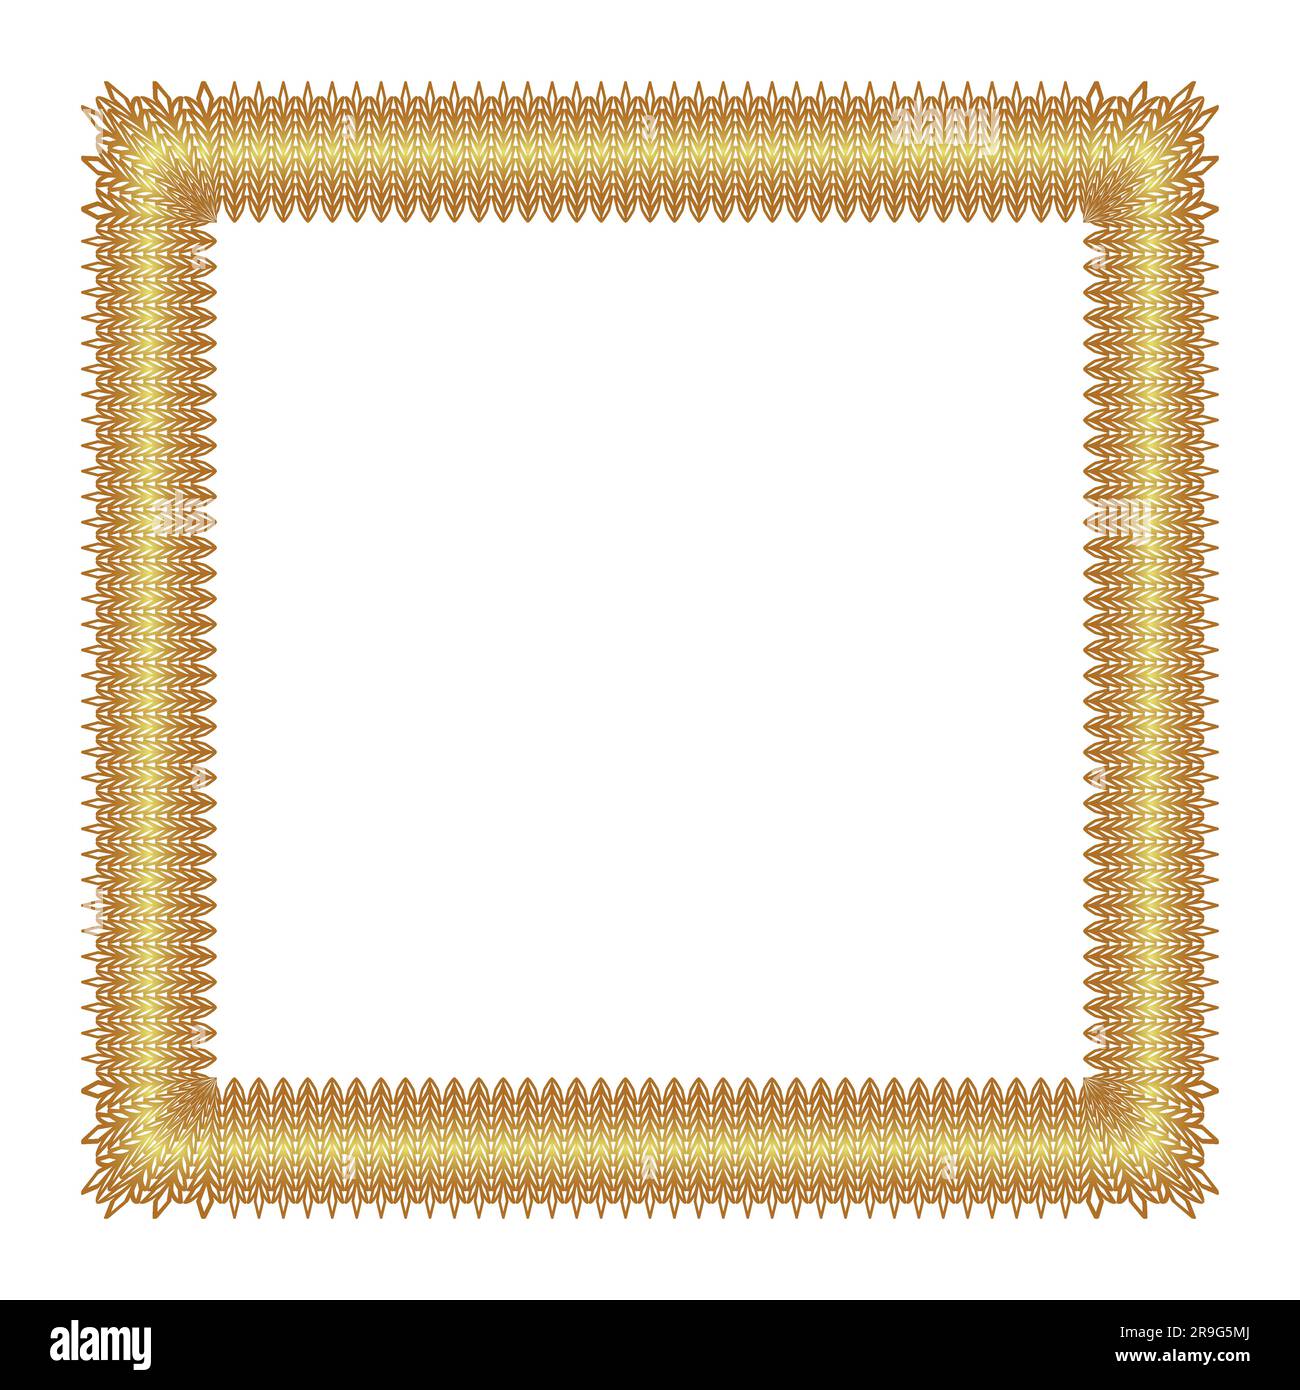 Gold knit ornament frame Copy space Square golden design element Horizontal or vertical vector illustration Isolated on white background Stock Vector